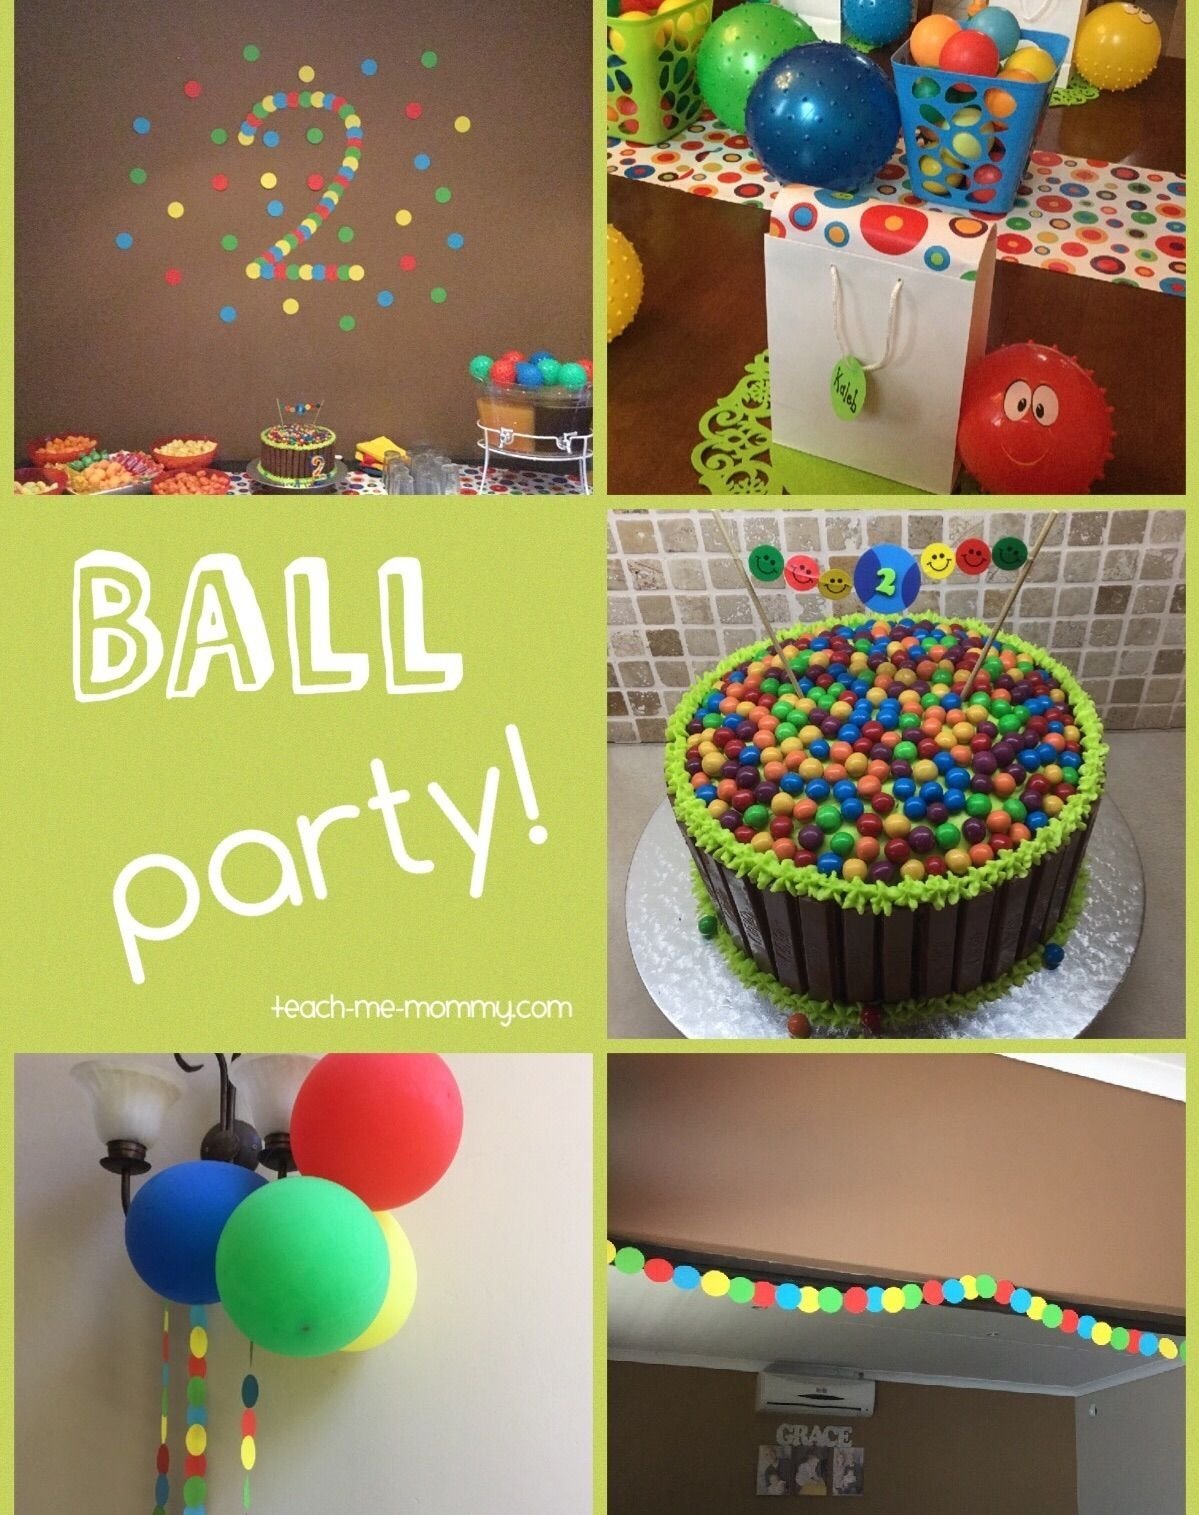 10 Awesome Two Year Old Birthday Ideas ball themed party for a 2 year old themed parties birthdays and 19 2022